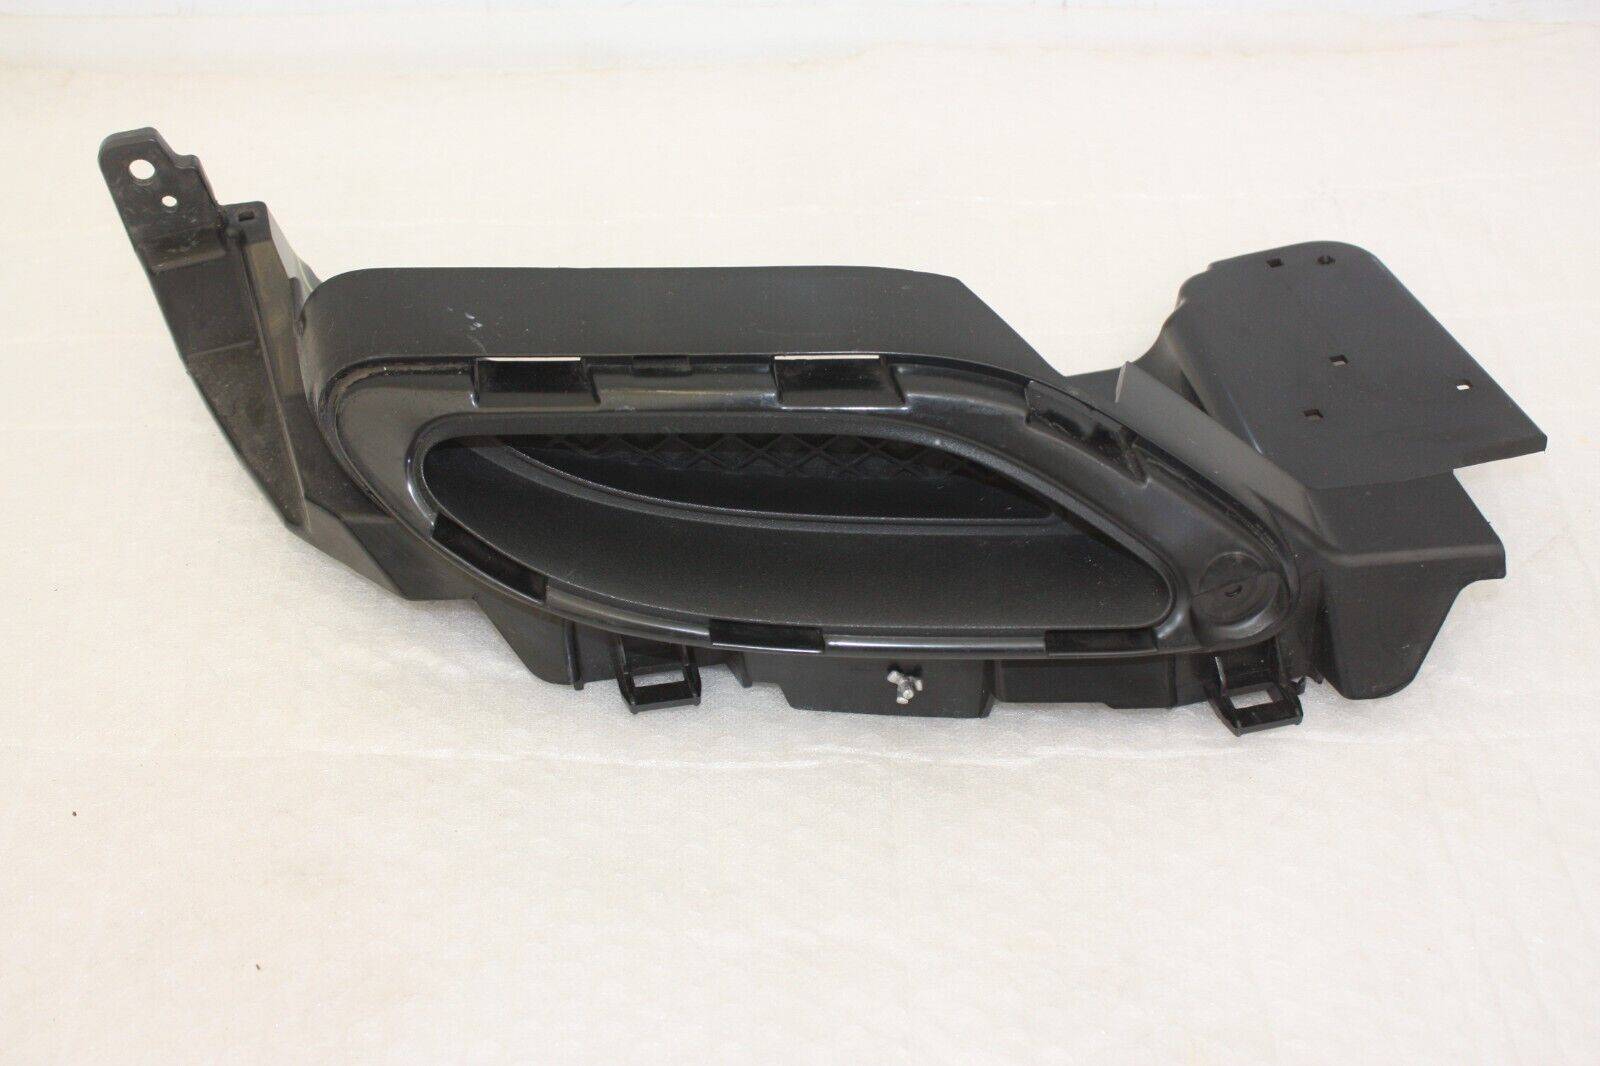 Mercedes E Class C238 AMG Rear Right Exhaust Tail Trim A2388850601 DAMAGED 176306004945